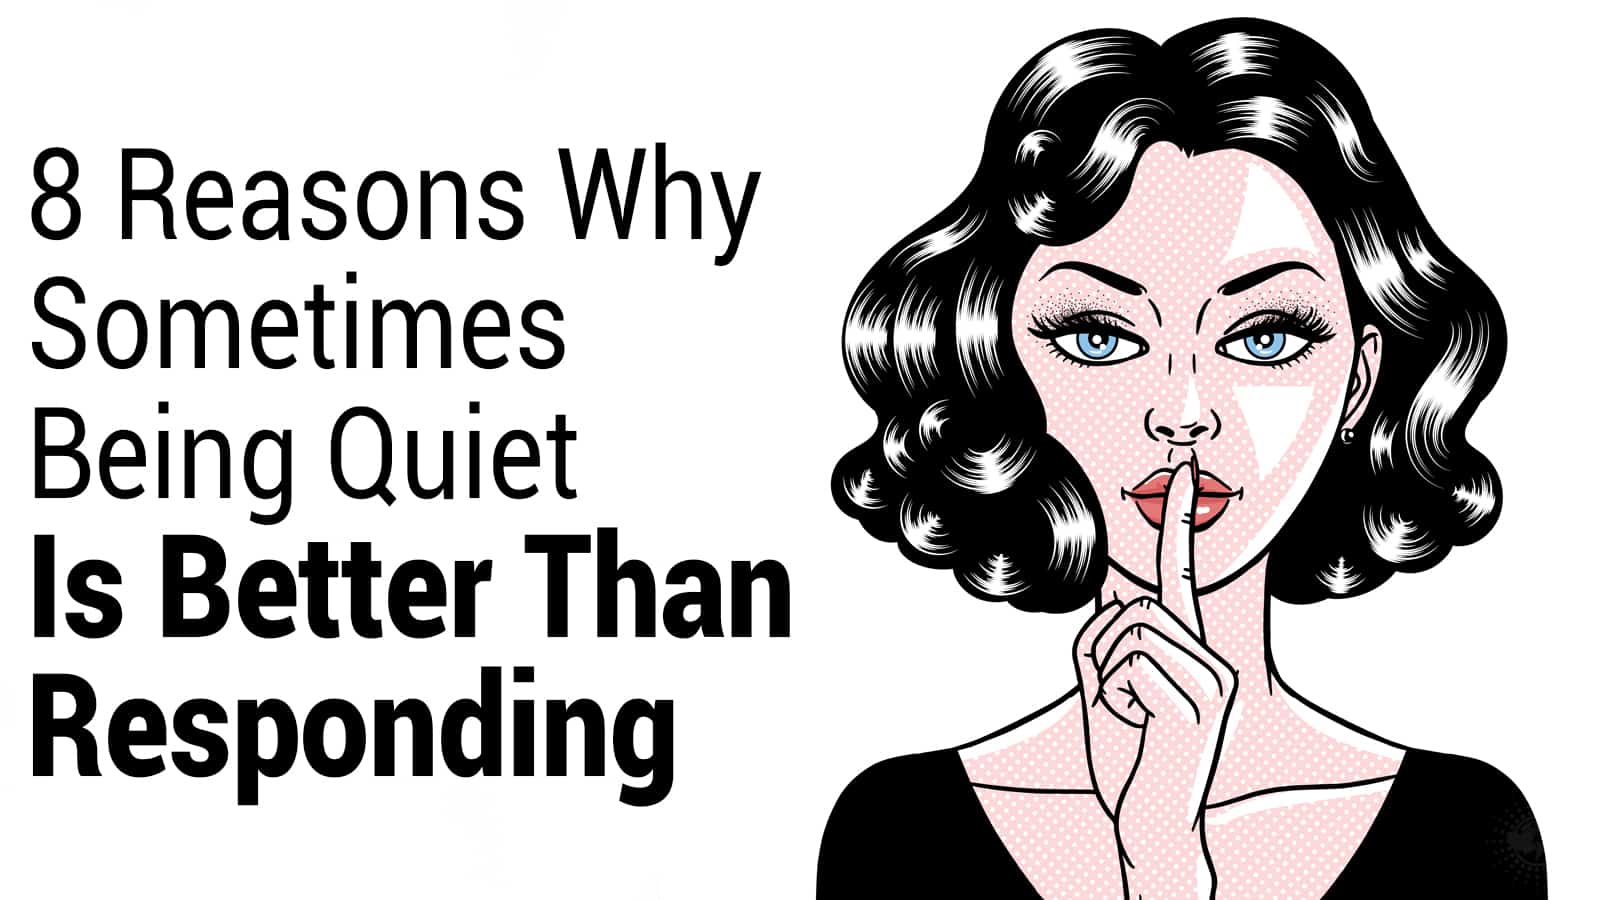 8 Reasons Why Sometimes Being Quiet Is Better Than Responding